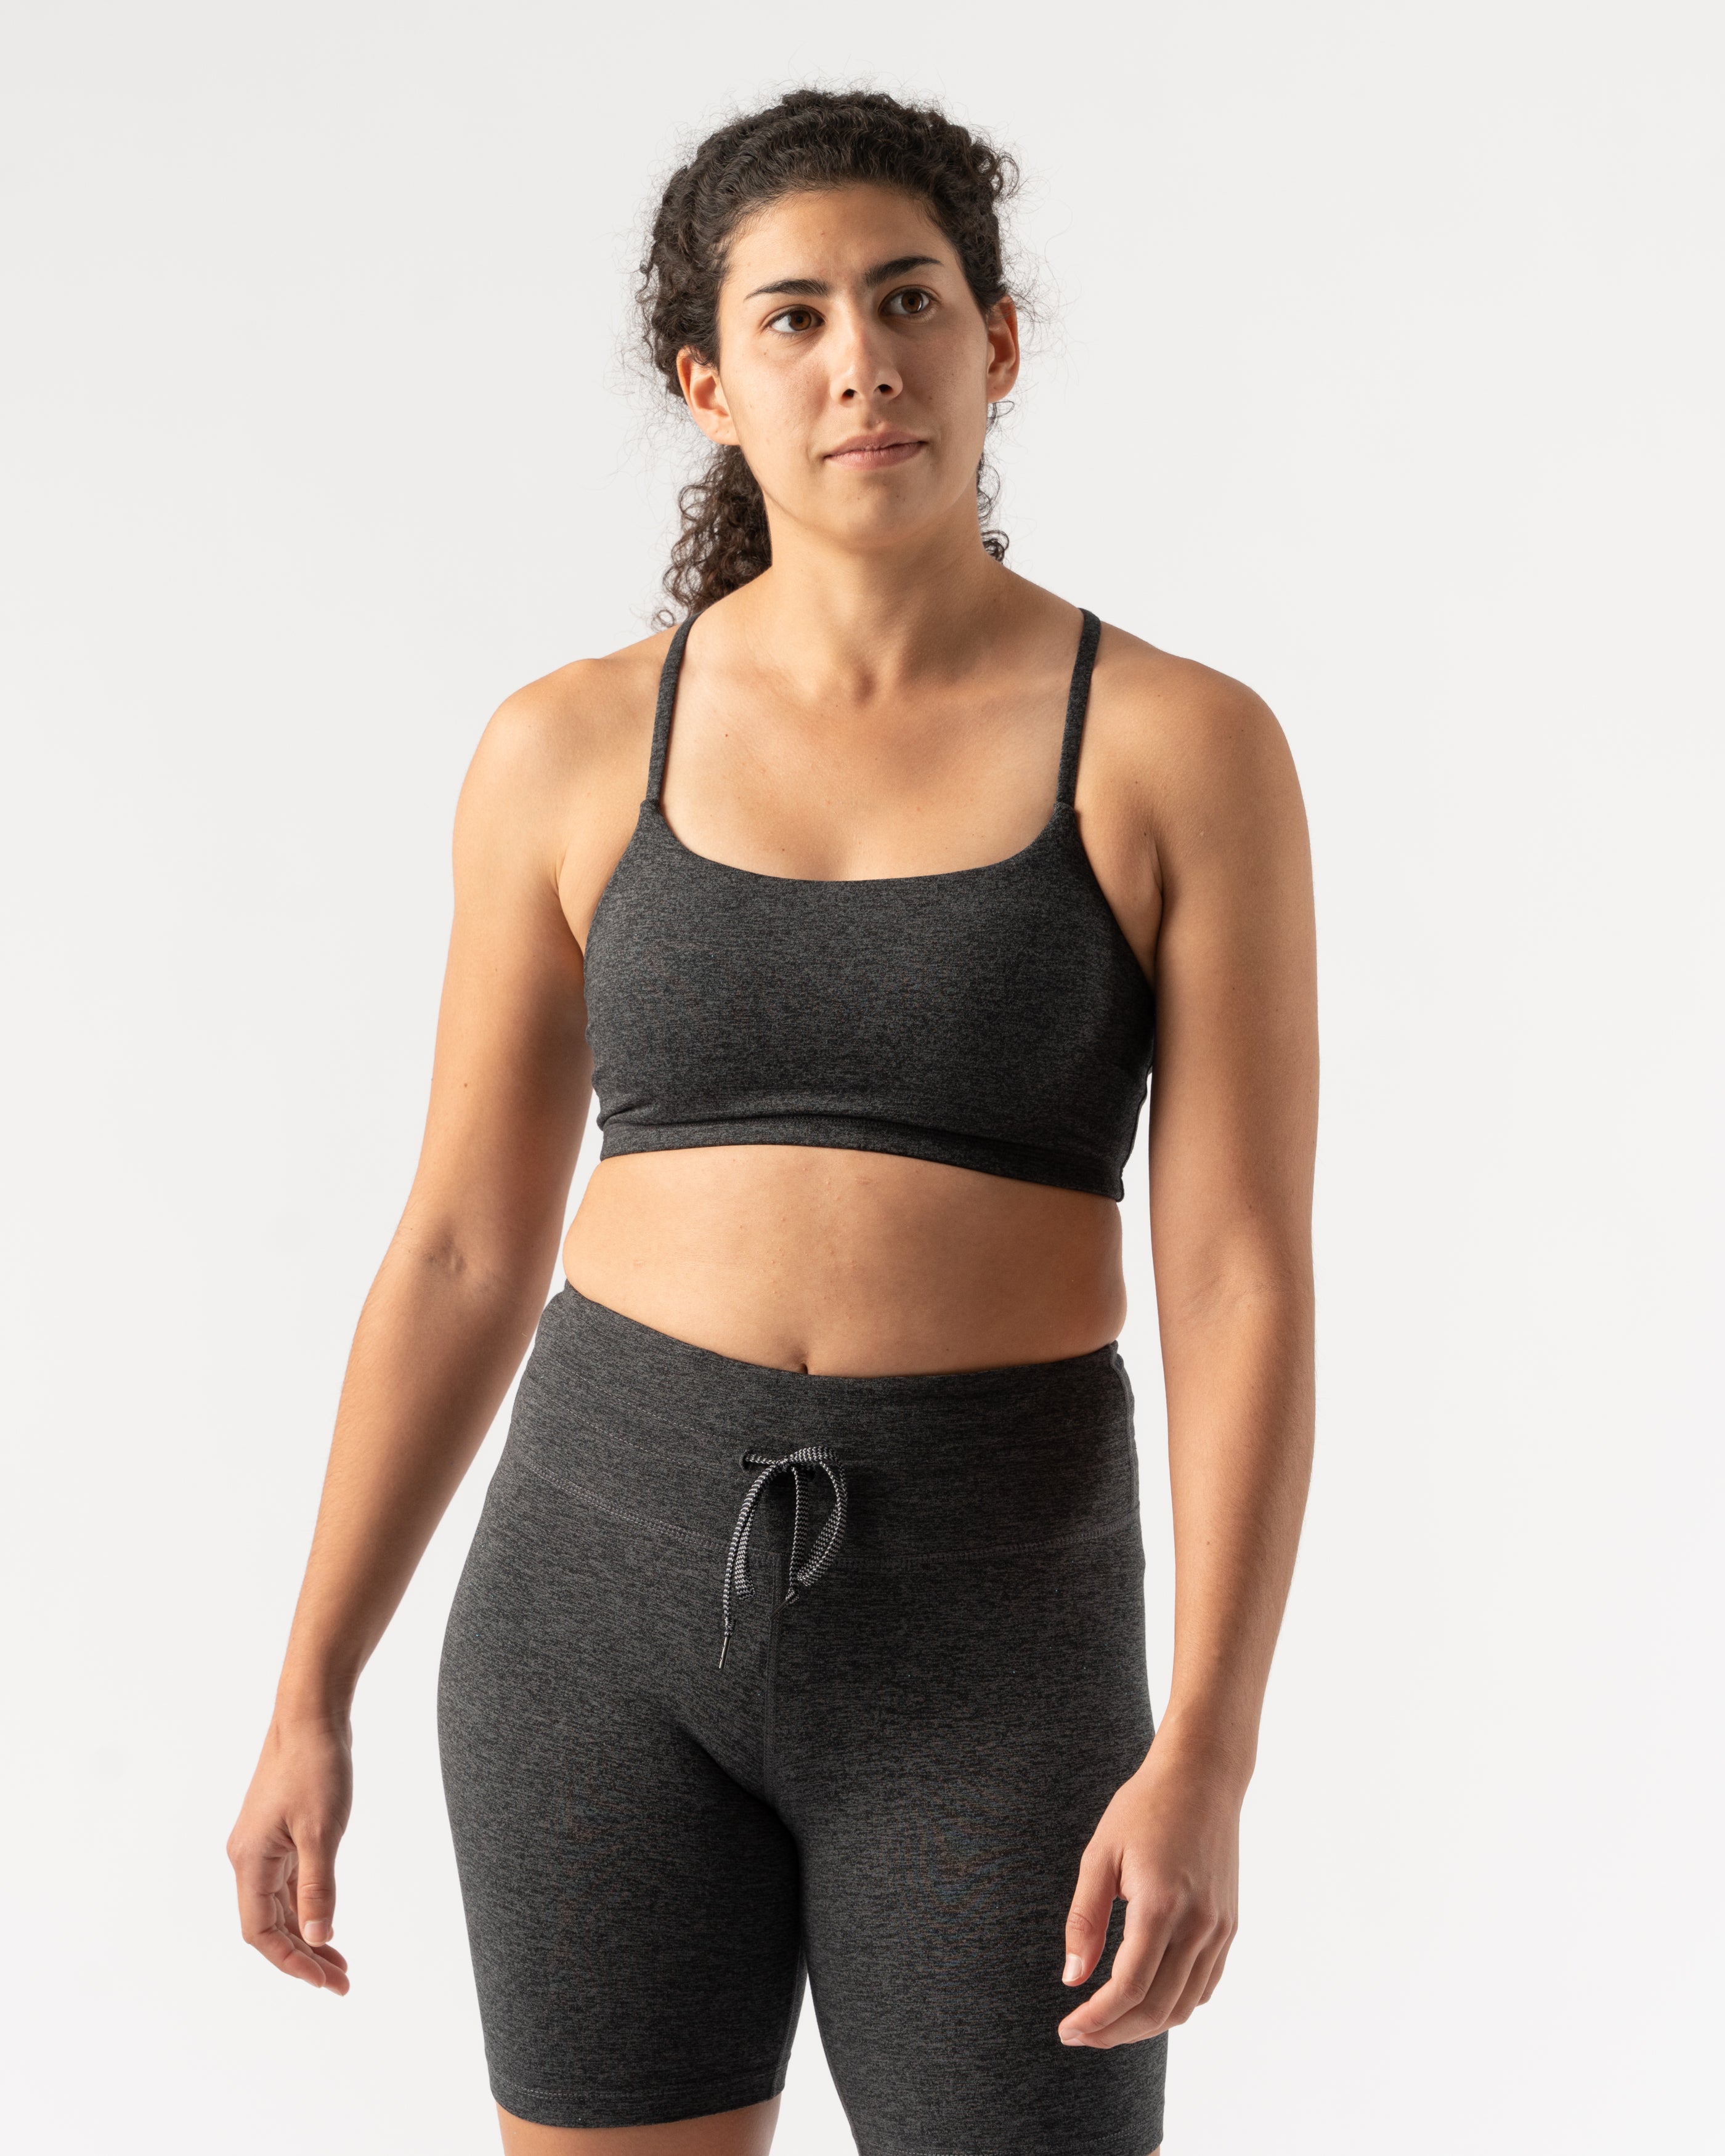 rabbit on Instagram: We can't choose favorites with our sports bras, but  if we had to pick one for functionality, Utilibra-vo steals the show 🌟  This top-seller not only minimizes bounce but